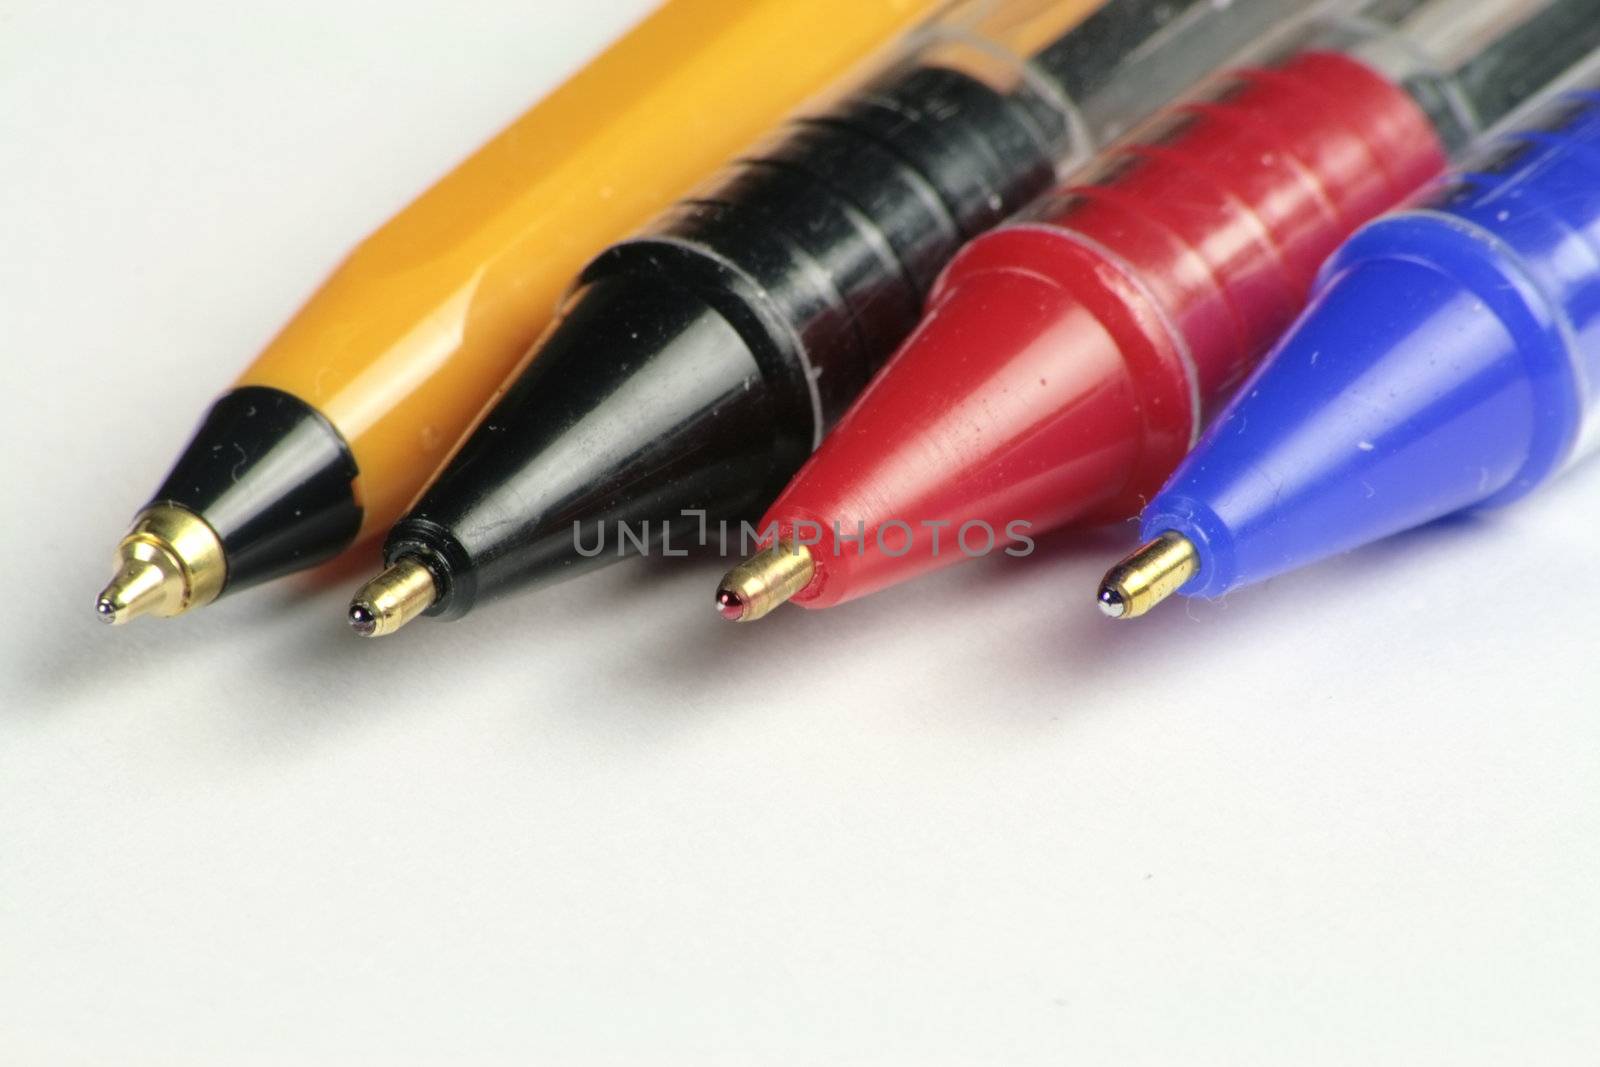 four different coloured ball point pens by leafy